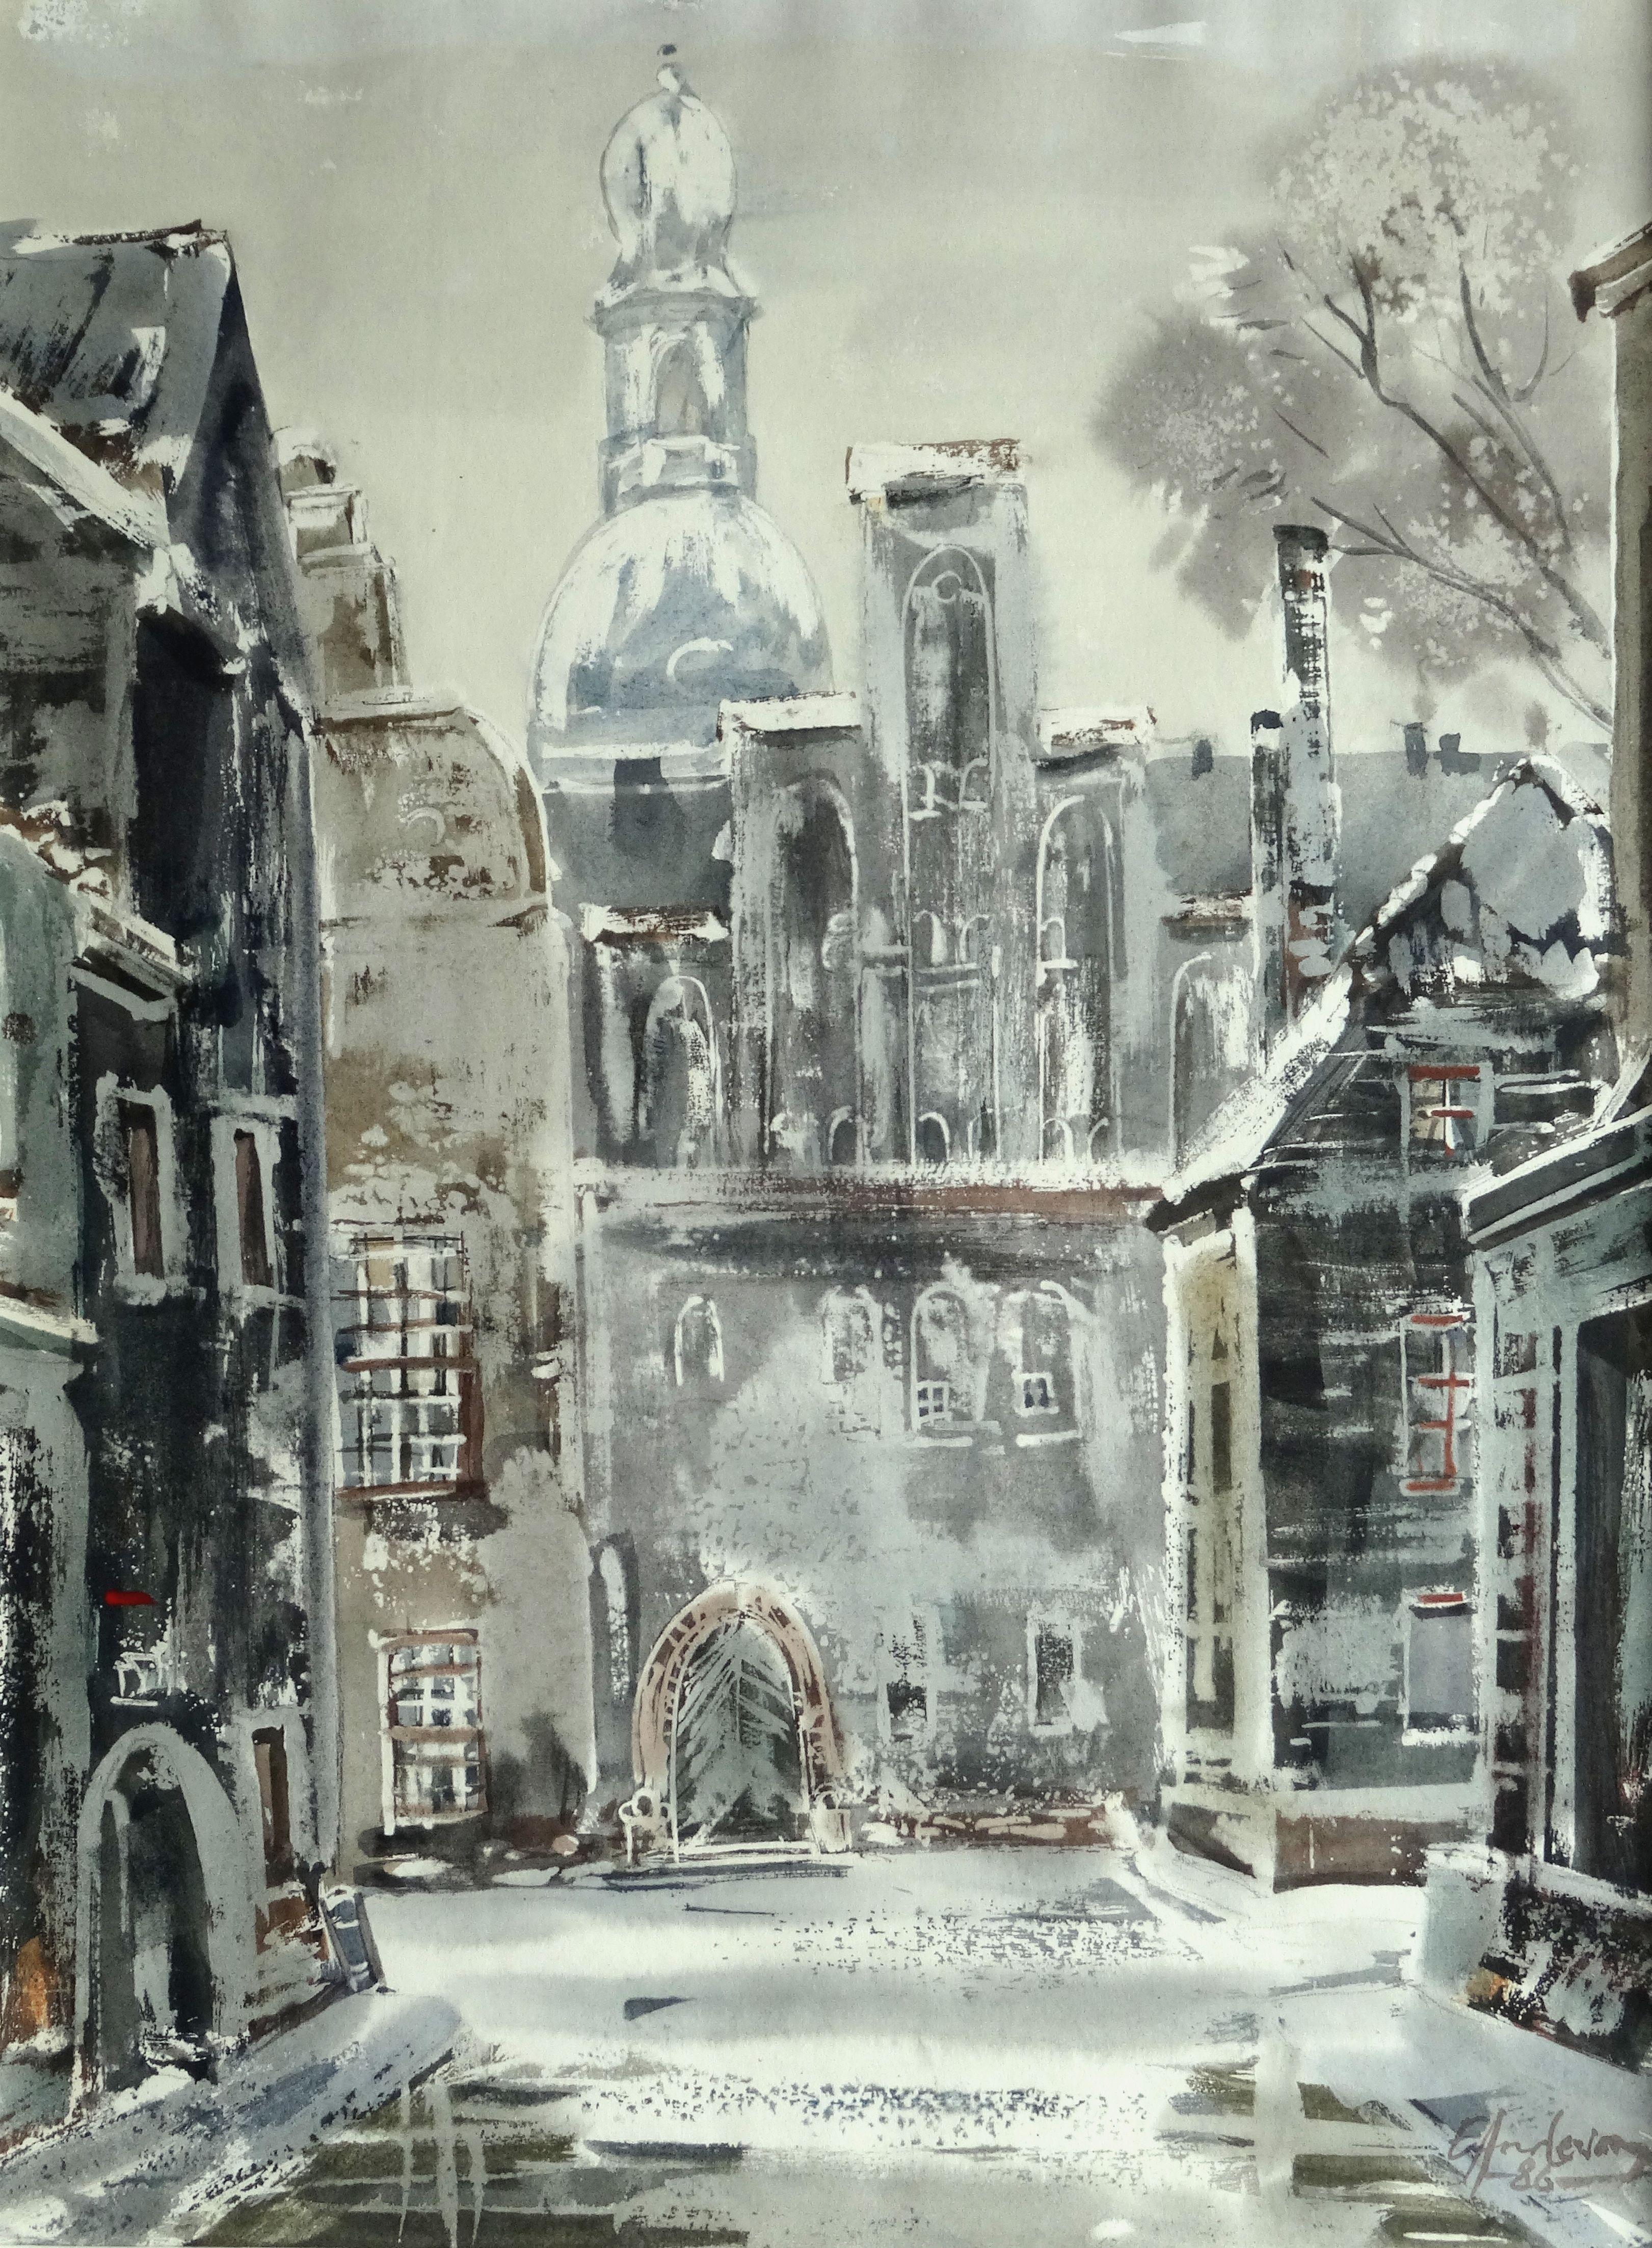 Edwin Andersons Landscape Painting - Old City. 1986. Paper, watercolor, 47x34 cm